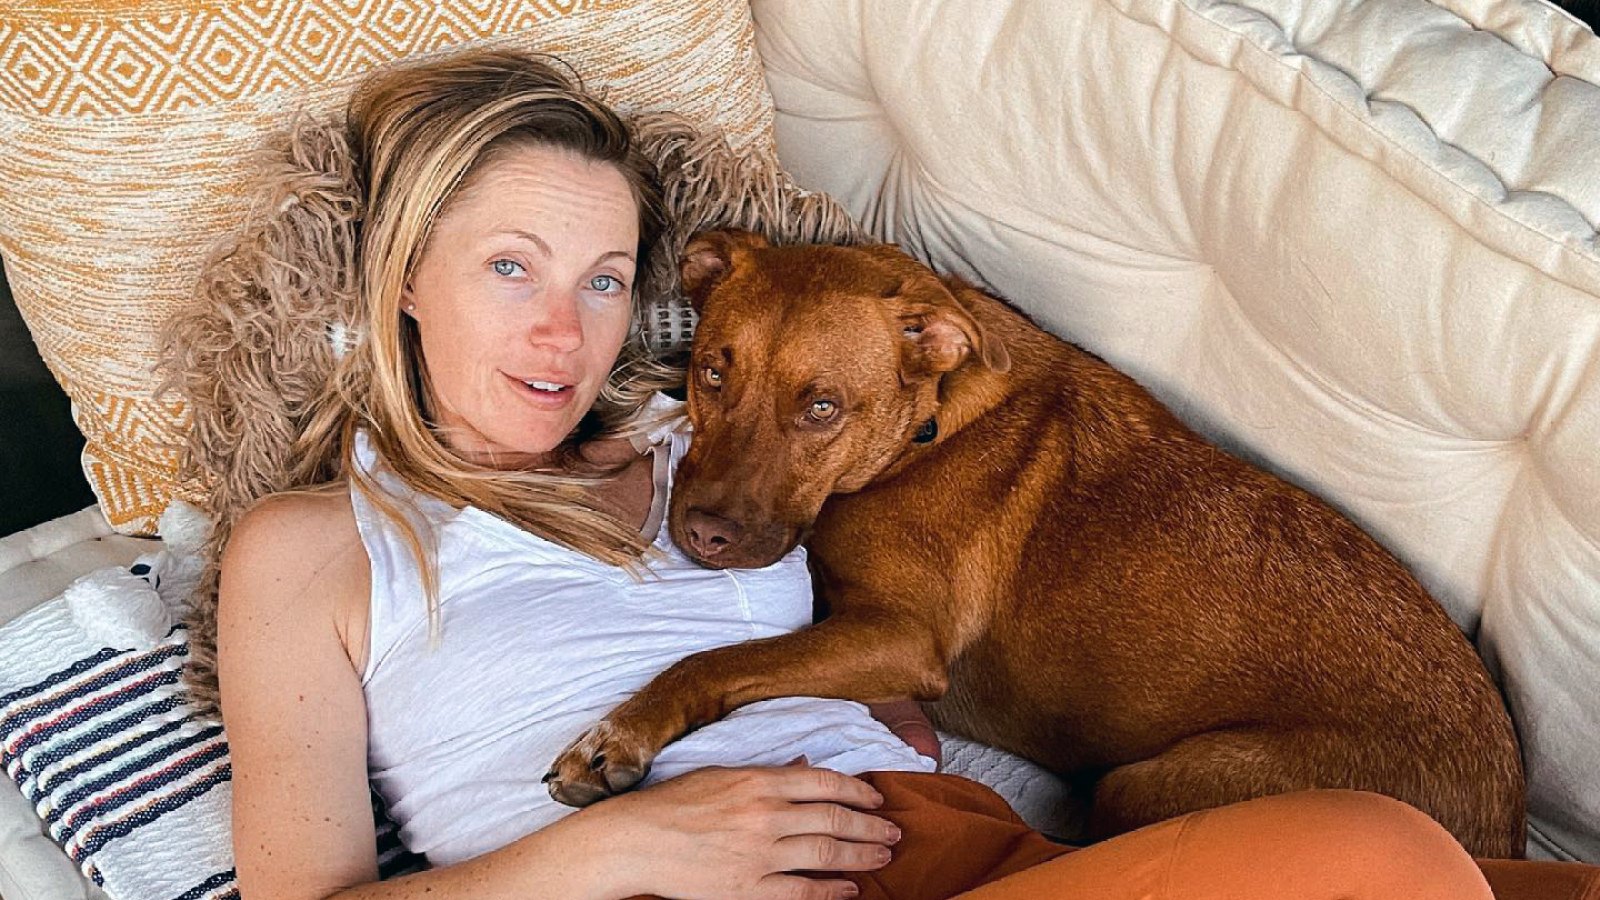 Sarah Herron's Dog Hasn’t ‘Left My Side’ Since Pregnancy Loss: 'Don't Know What I Would Do Without Him'